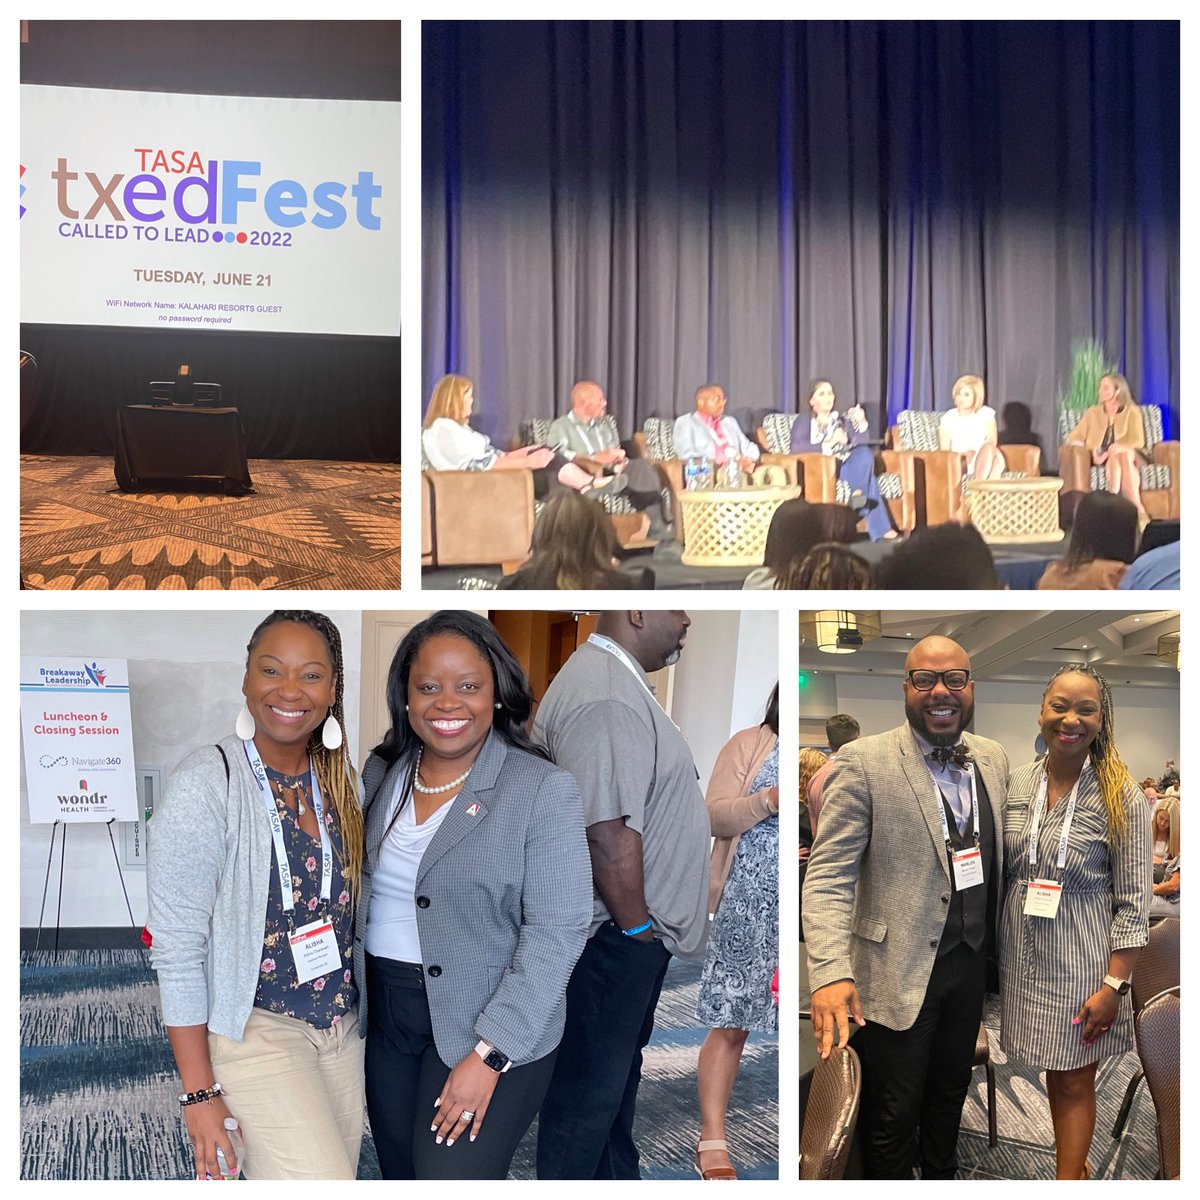 I’m having an amazing time at #txedFest a 🧵 of reflection and learning from educational rockstars under one roof at @tasanet